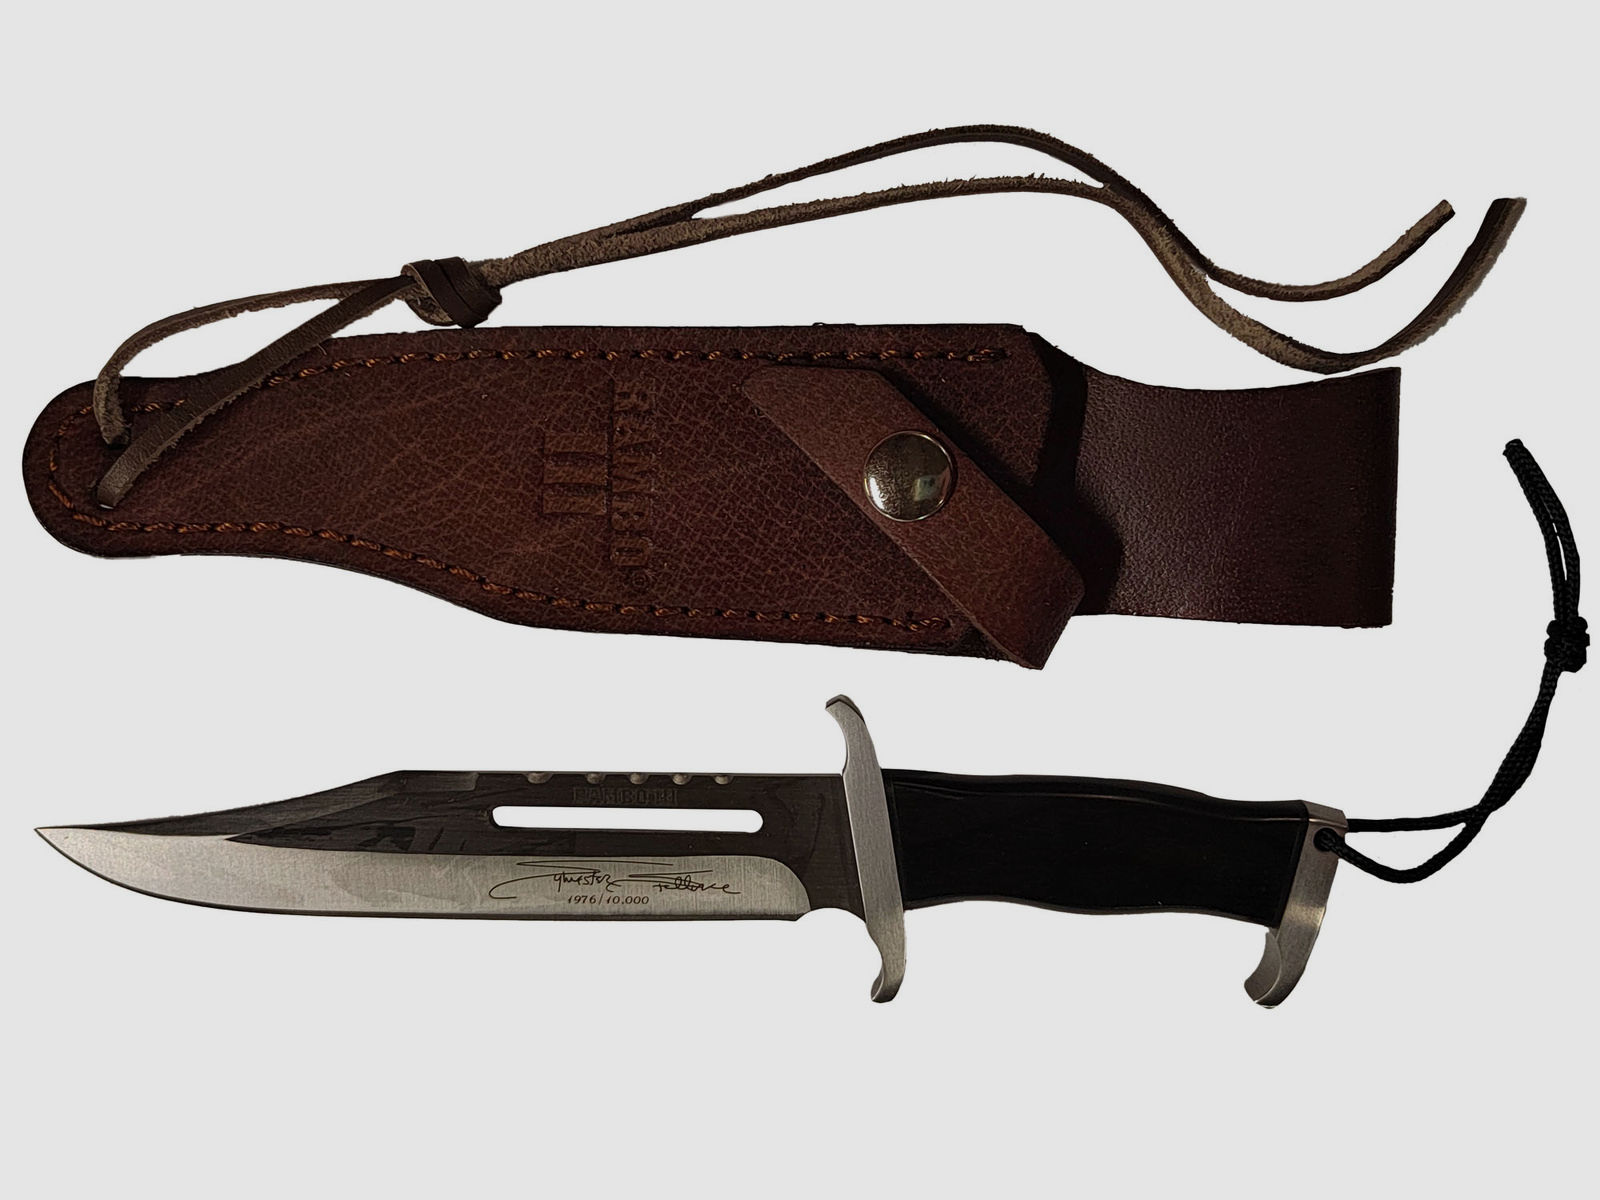 Rambo III Mini Bowie Messer - Limited Edition | 94683